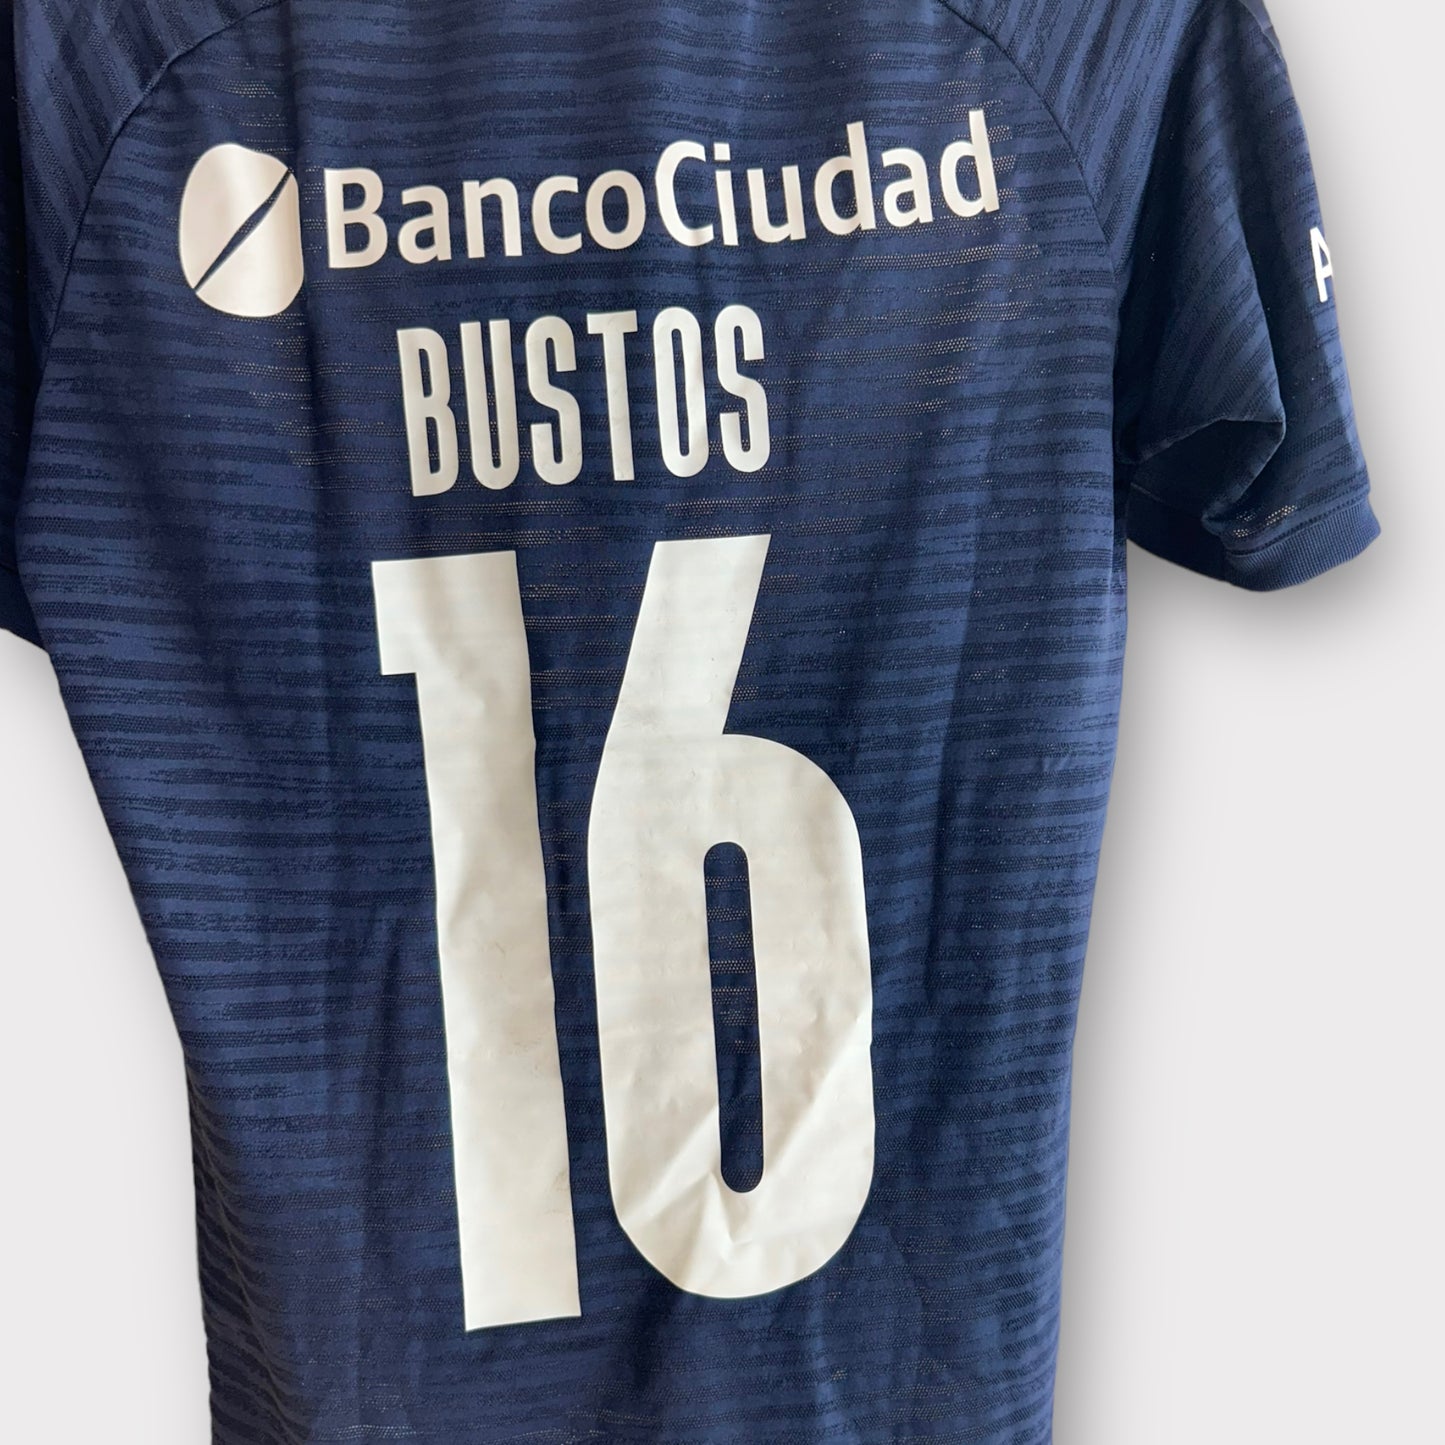 Independiente 2020 Match Issued Away Shirt - Fabricio Bustos 20 (Small)